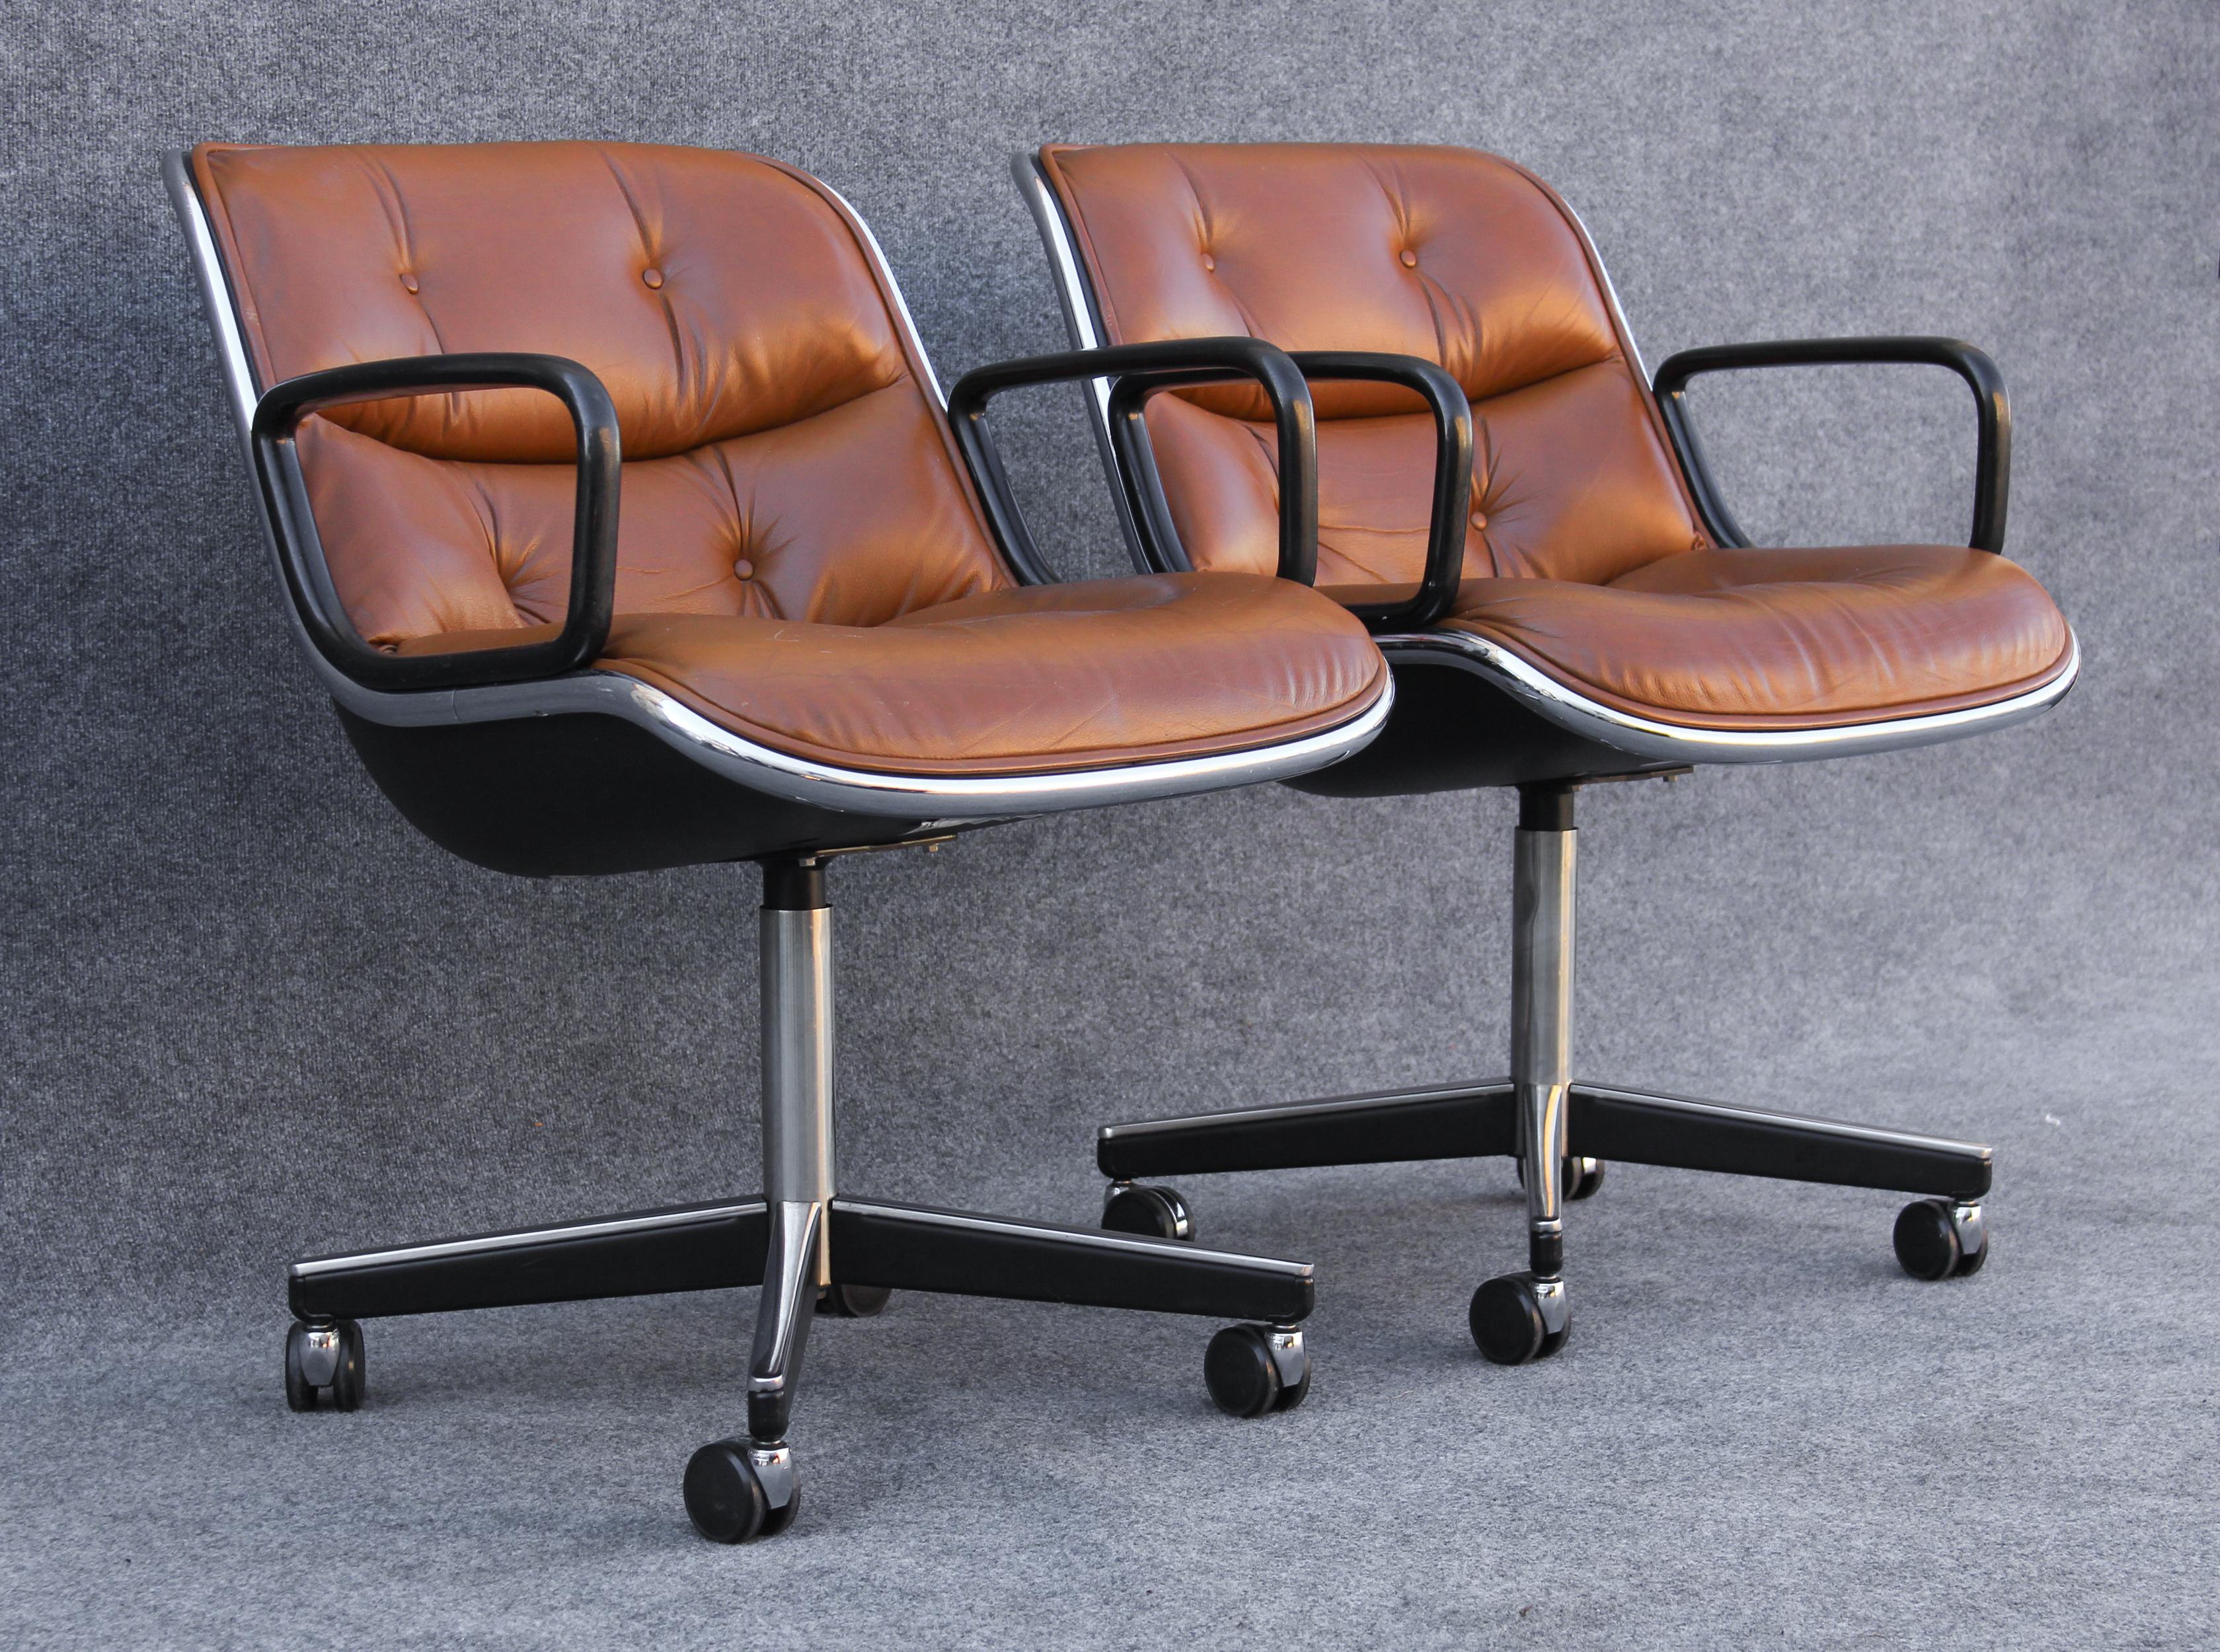 Mid-20th Century Pair of Charles Pollock for Knoll Arm or Desk Chairs in Brown Leather & Black